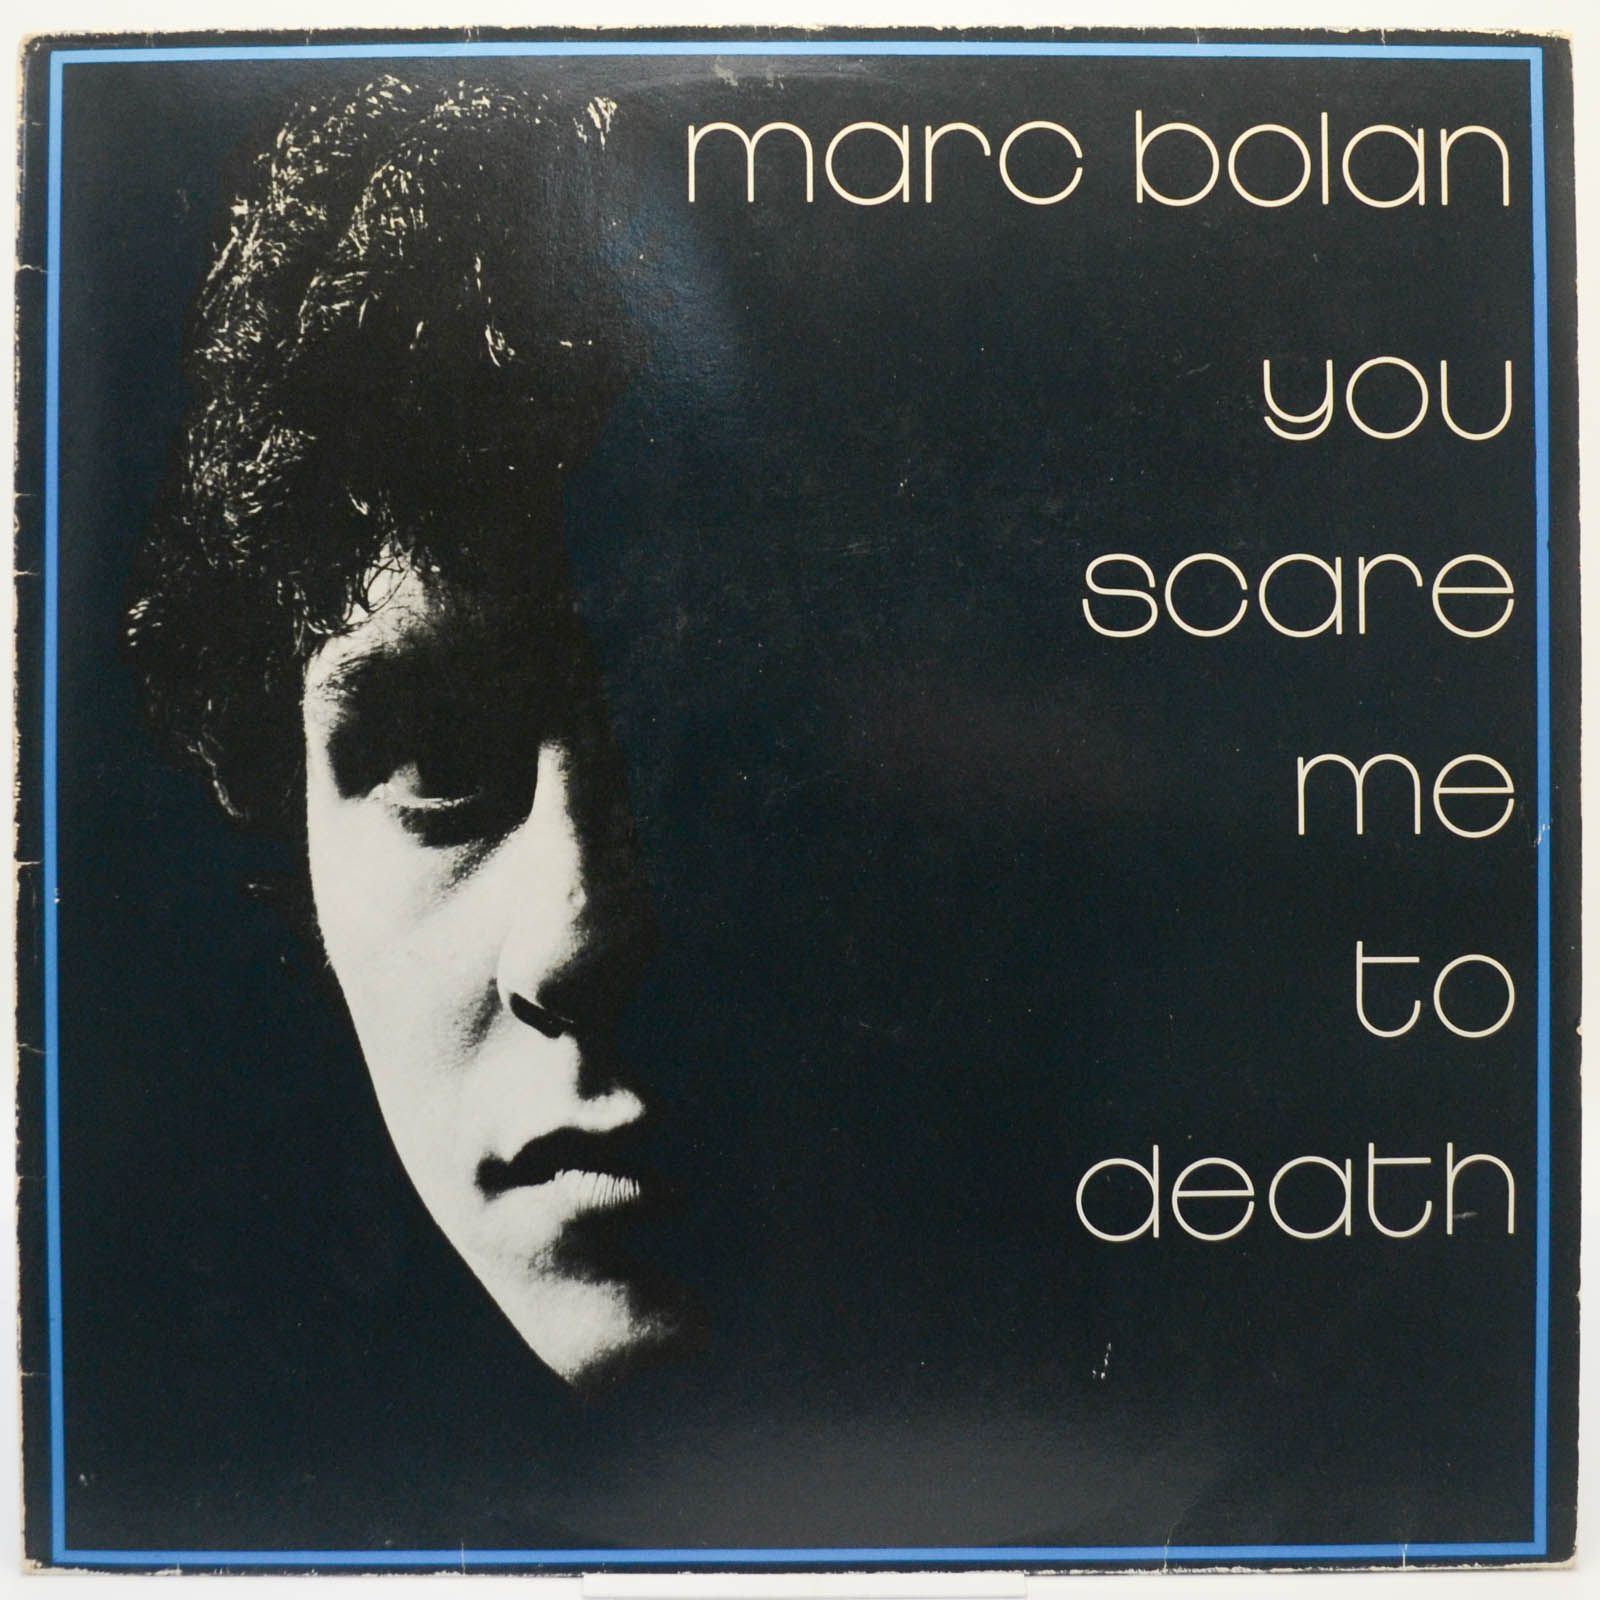 Marc Bolan — You Scare Me To Death, 1981